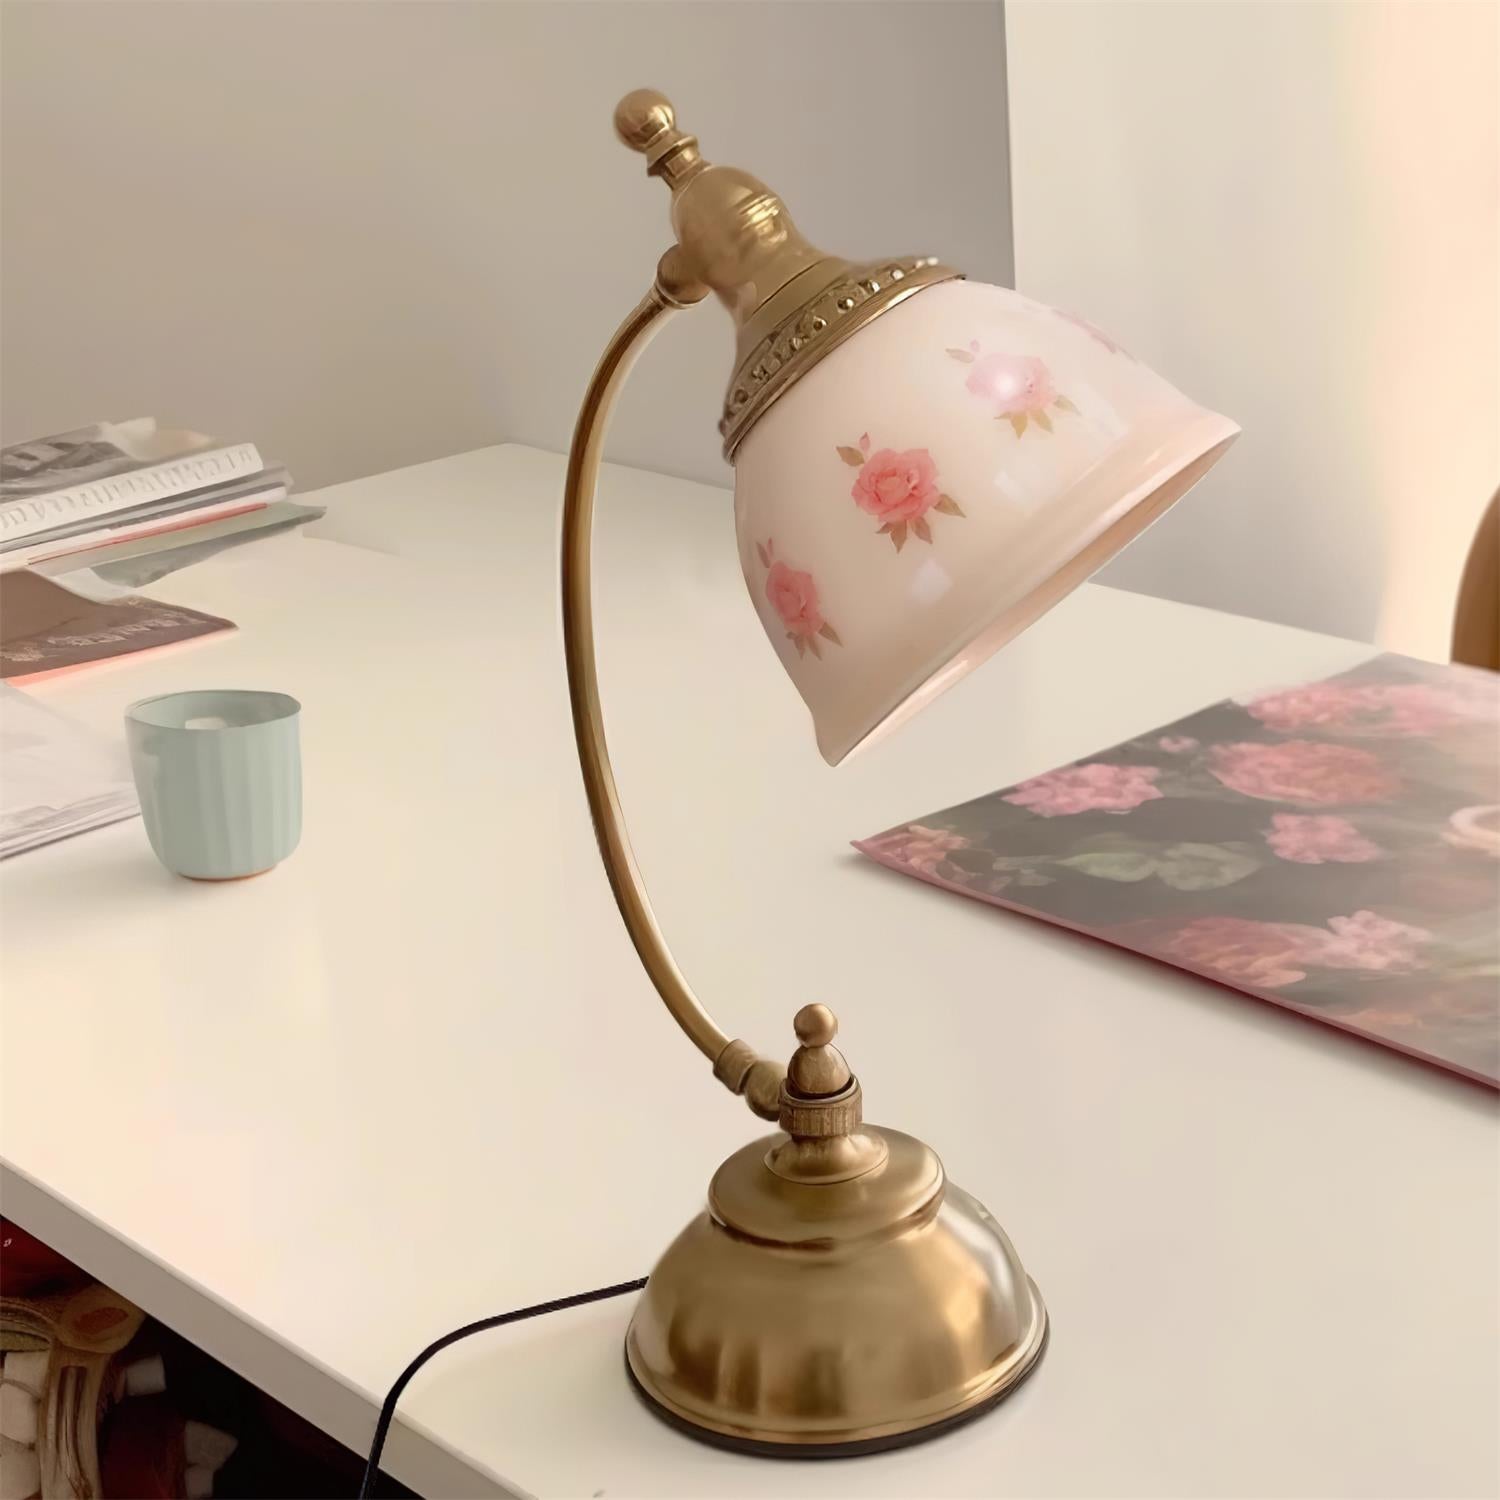 Mishya Floral Table Lamp